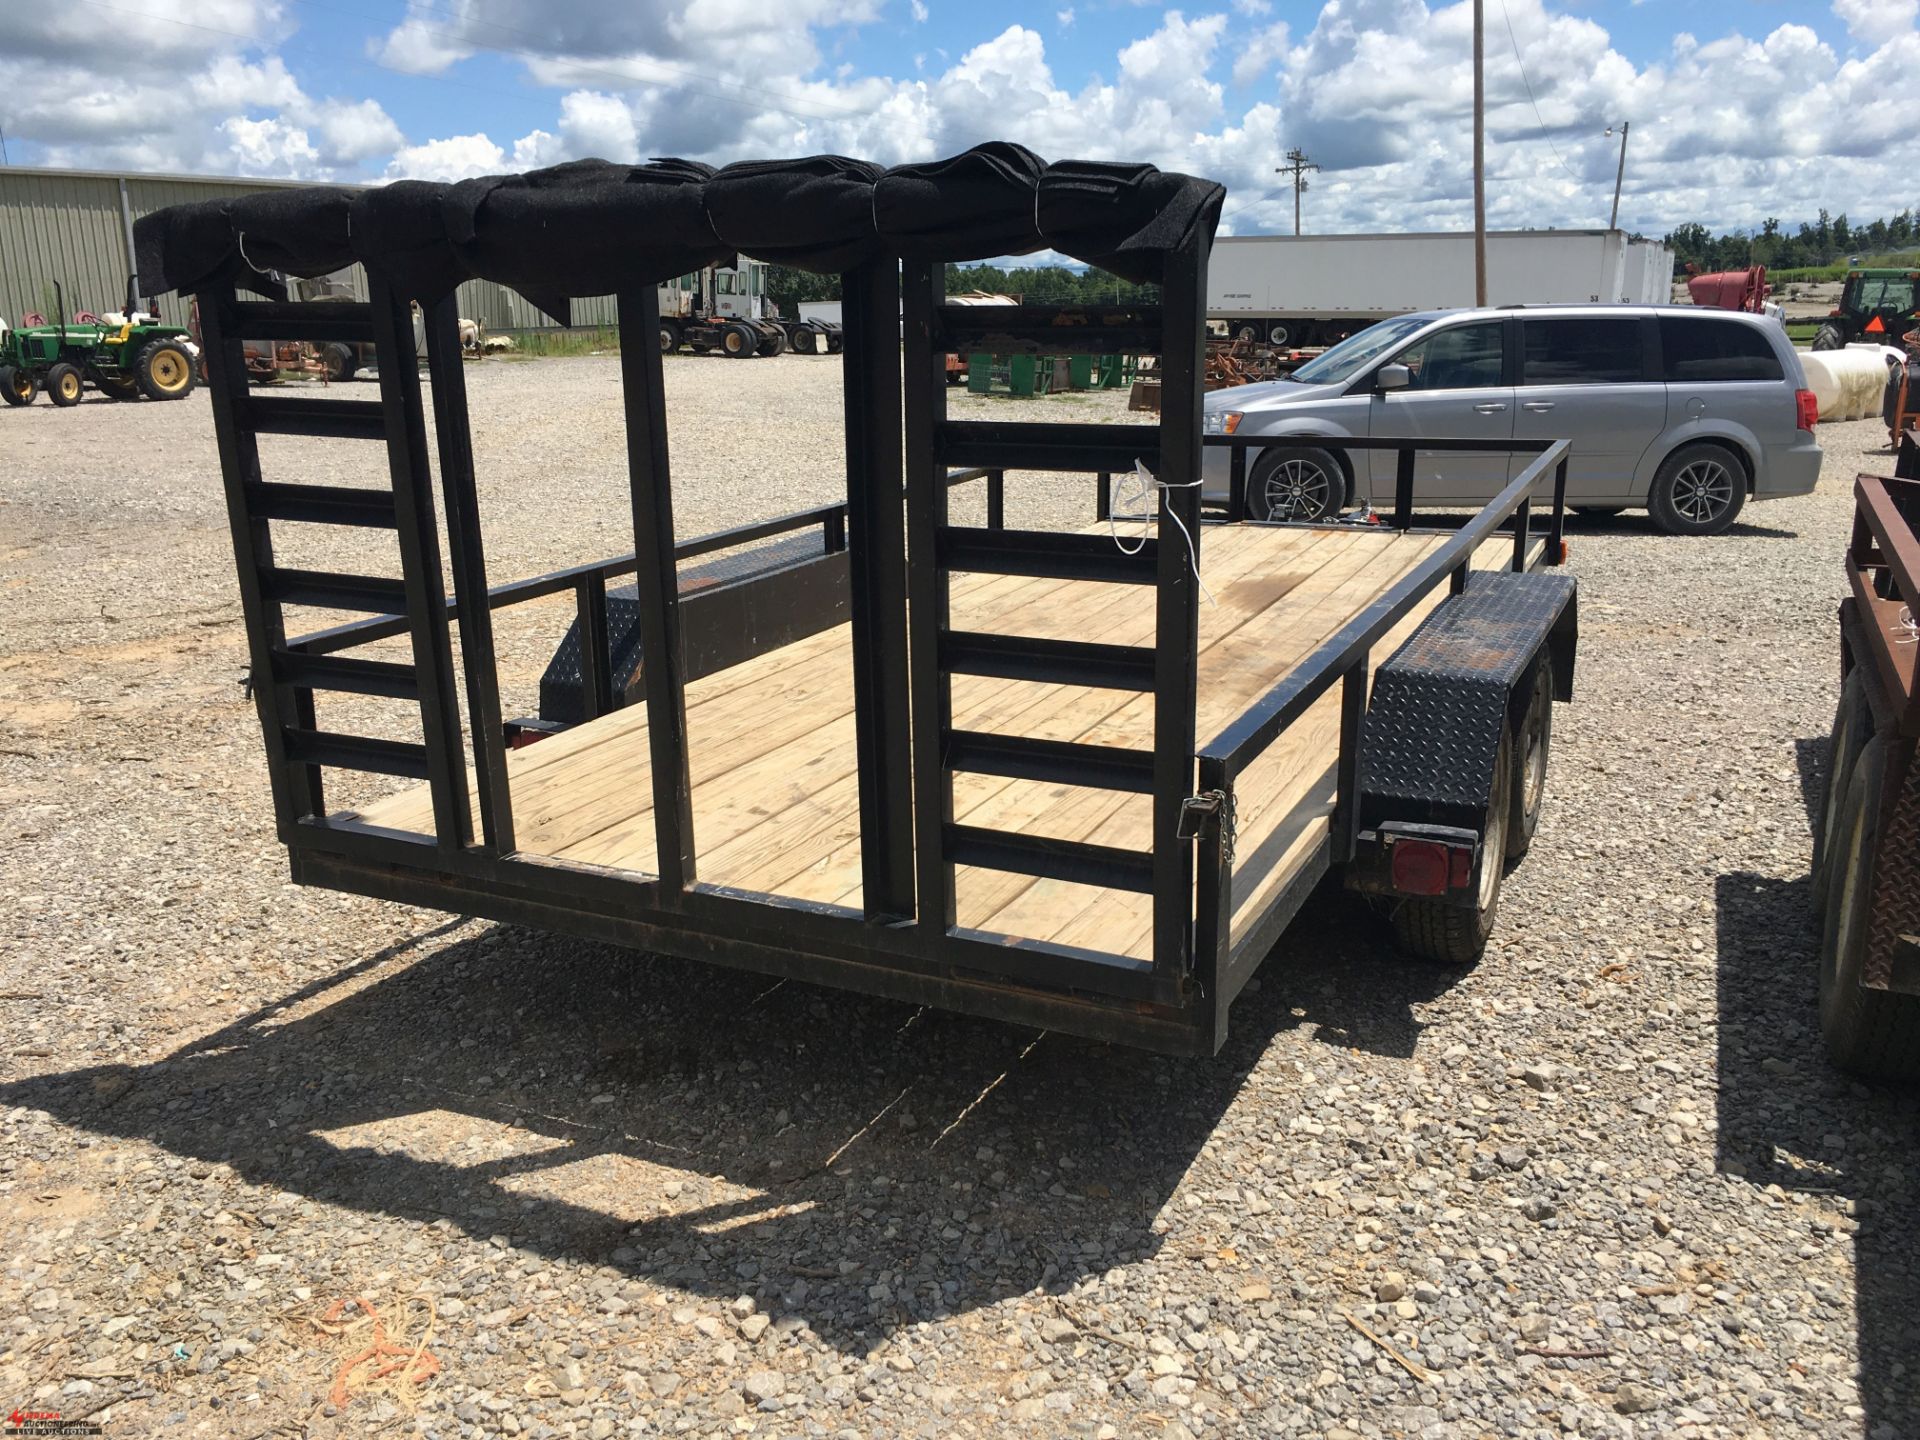 16' TRAILER, WITH WOOD DECK, FOLD DOWN RAMPS, CUSTOM BUILT BY FARM, DOES NOT SELL WITH - Image 4 of 7